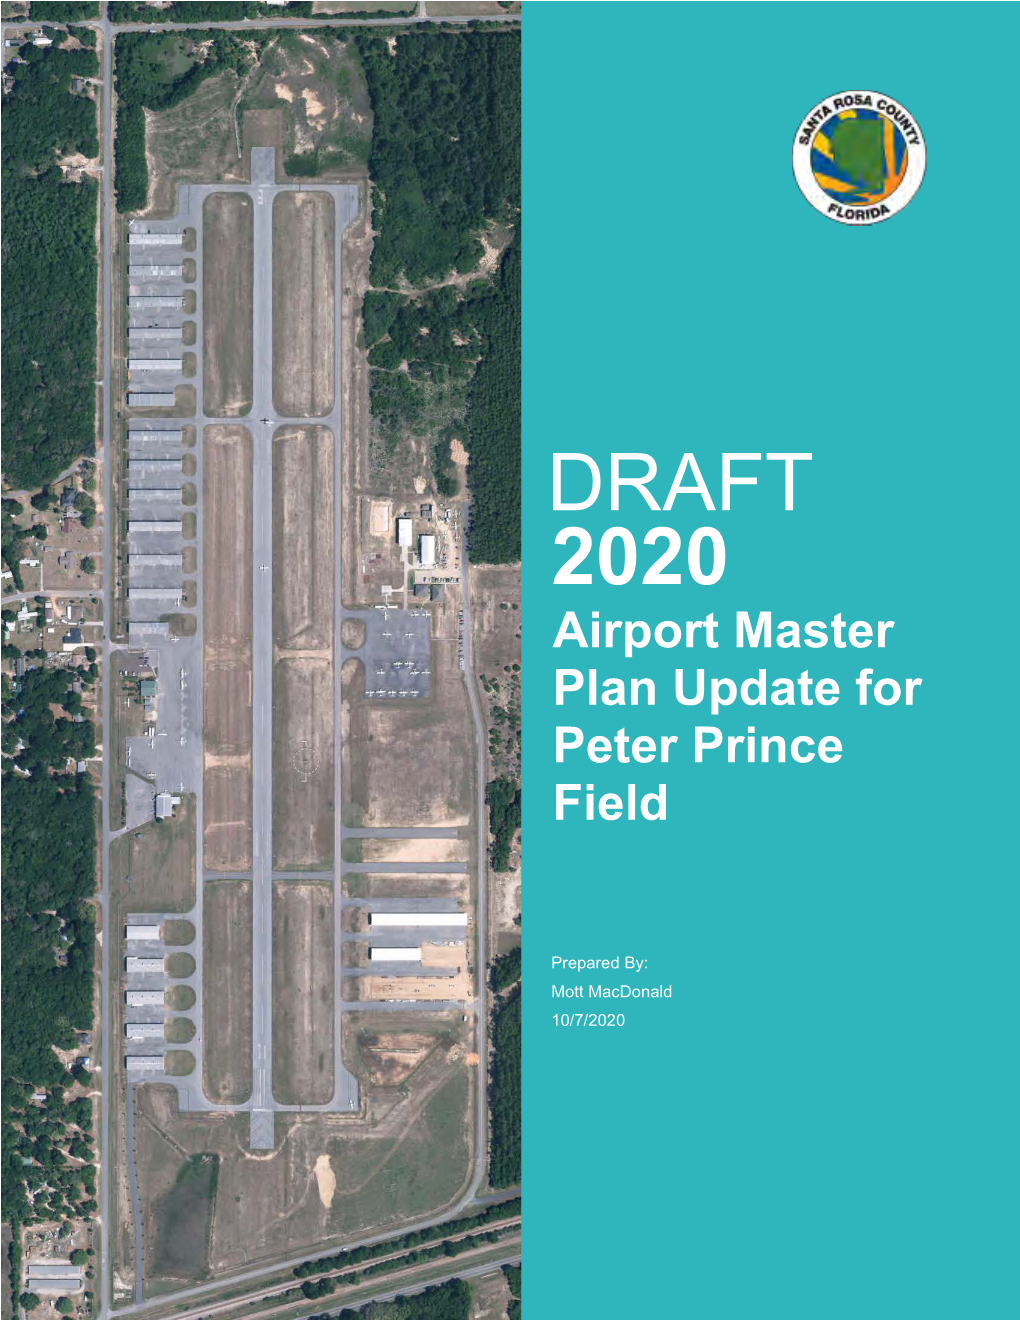 Airport Master Plan Update for Peter Prince Field